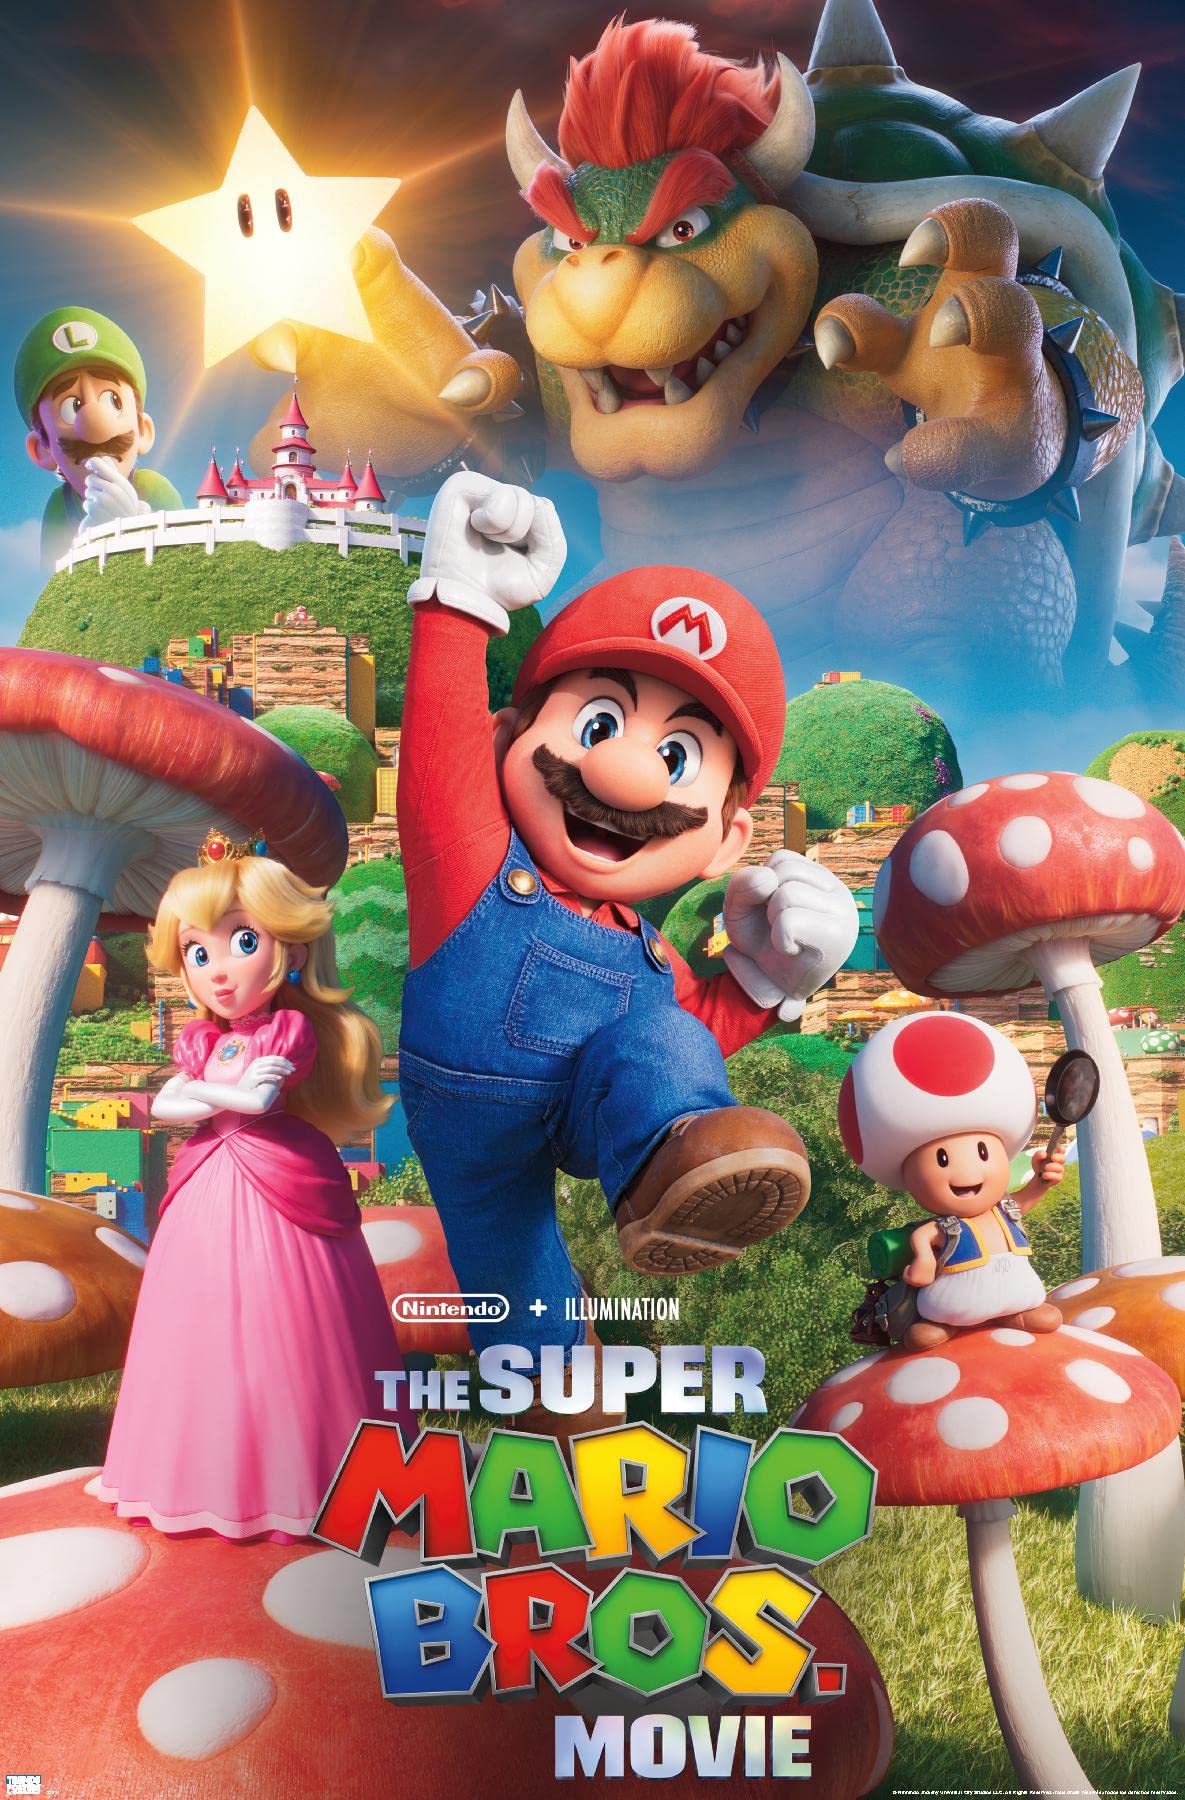 The Super Mario Bros Movie (2023) 1080p HDts mp4 Eng gespr. Geen Subs